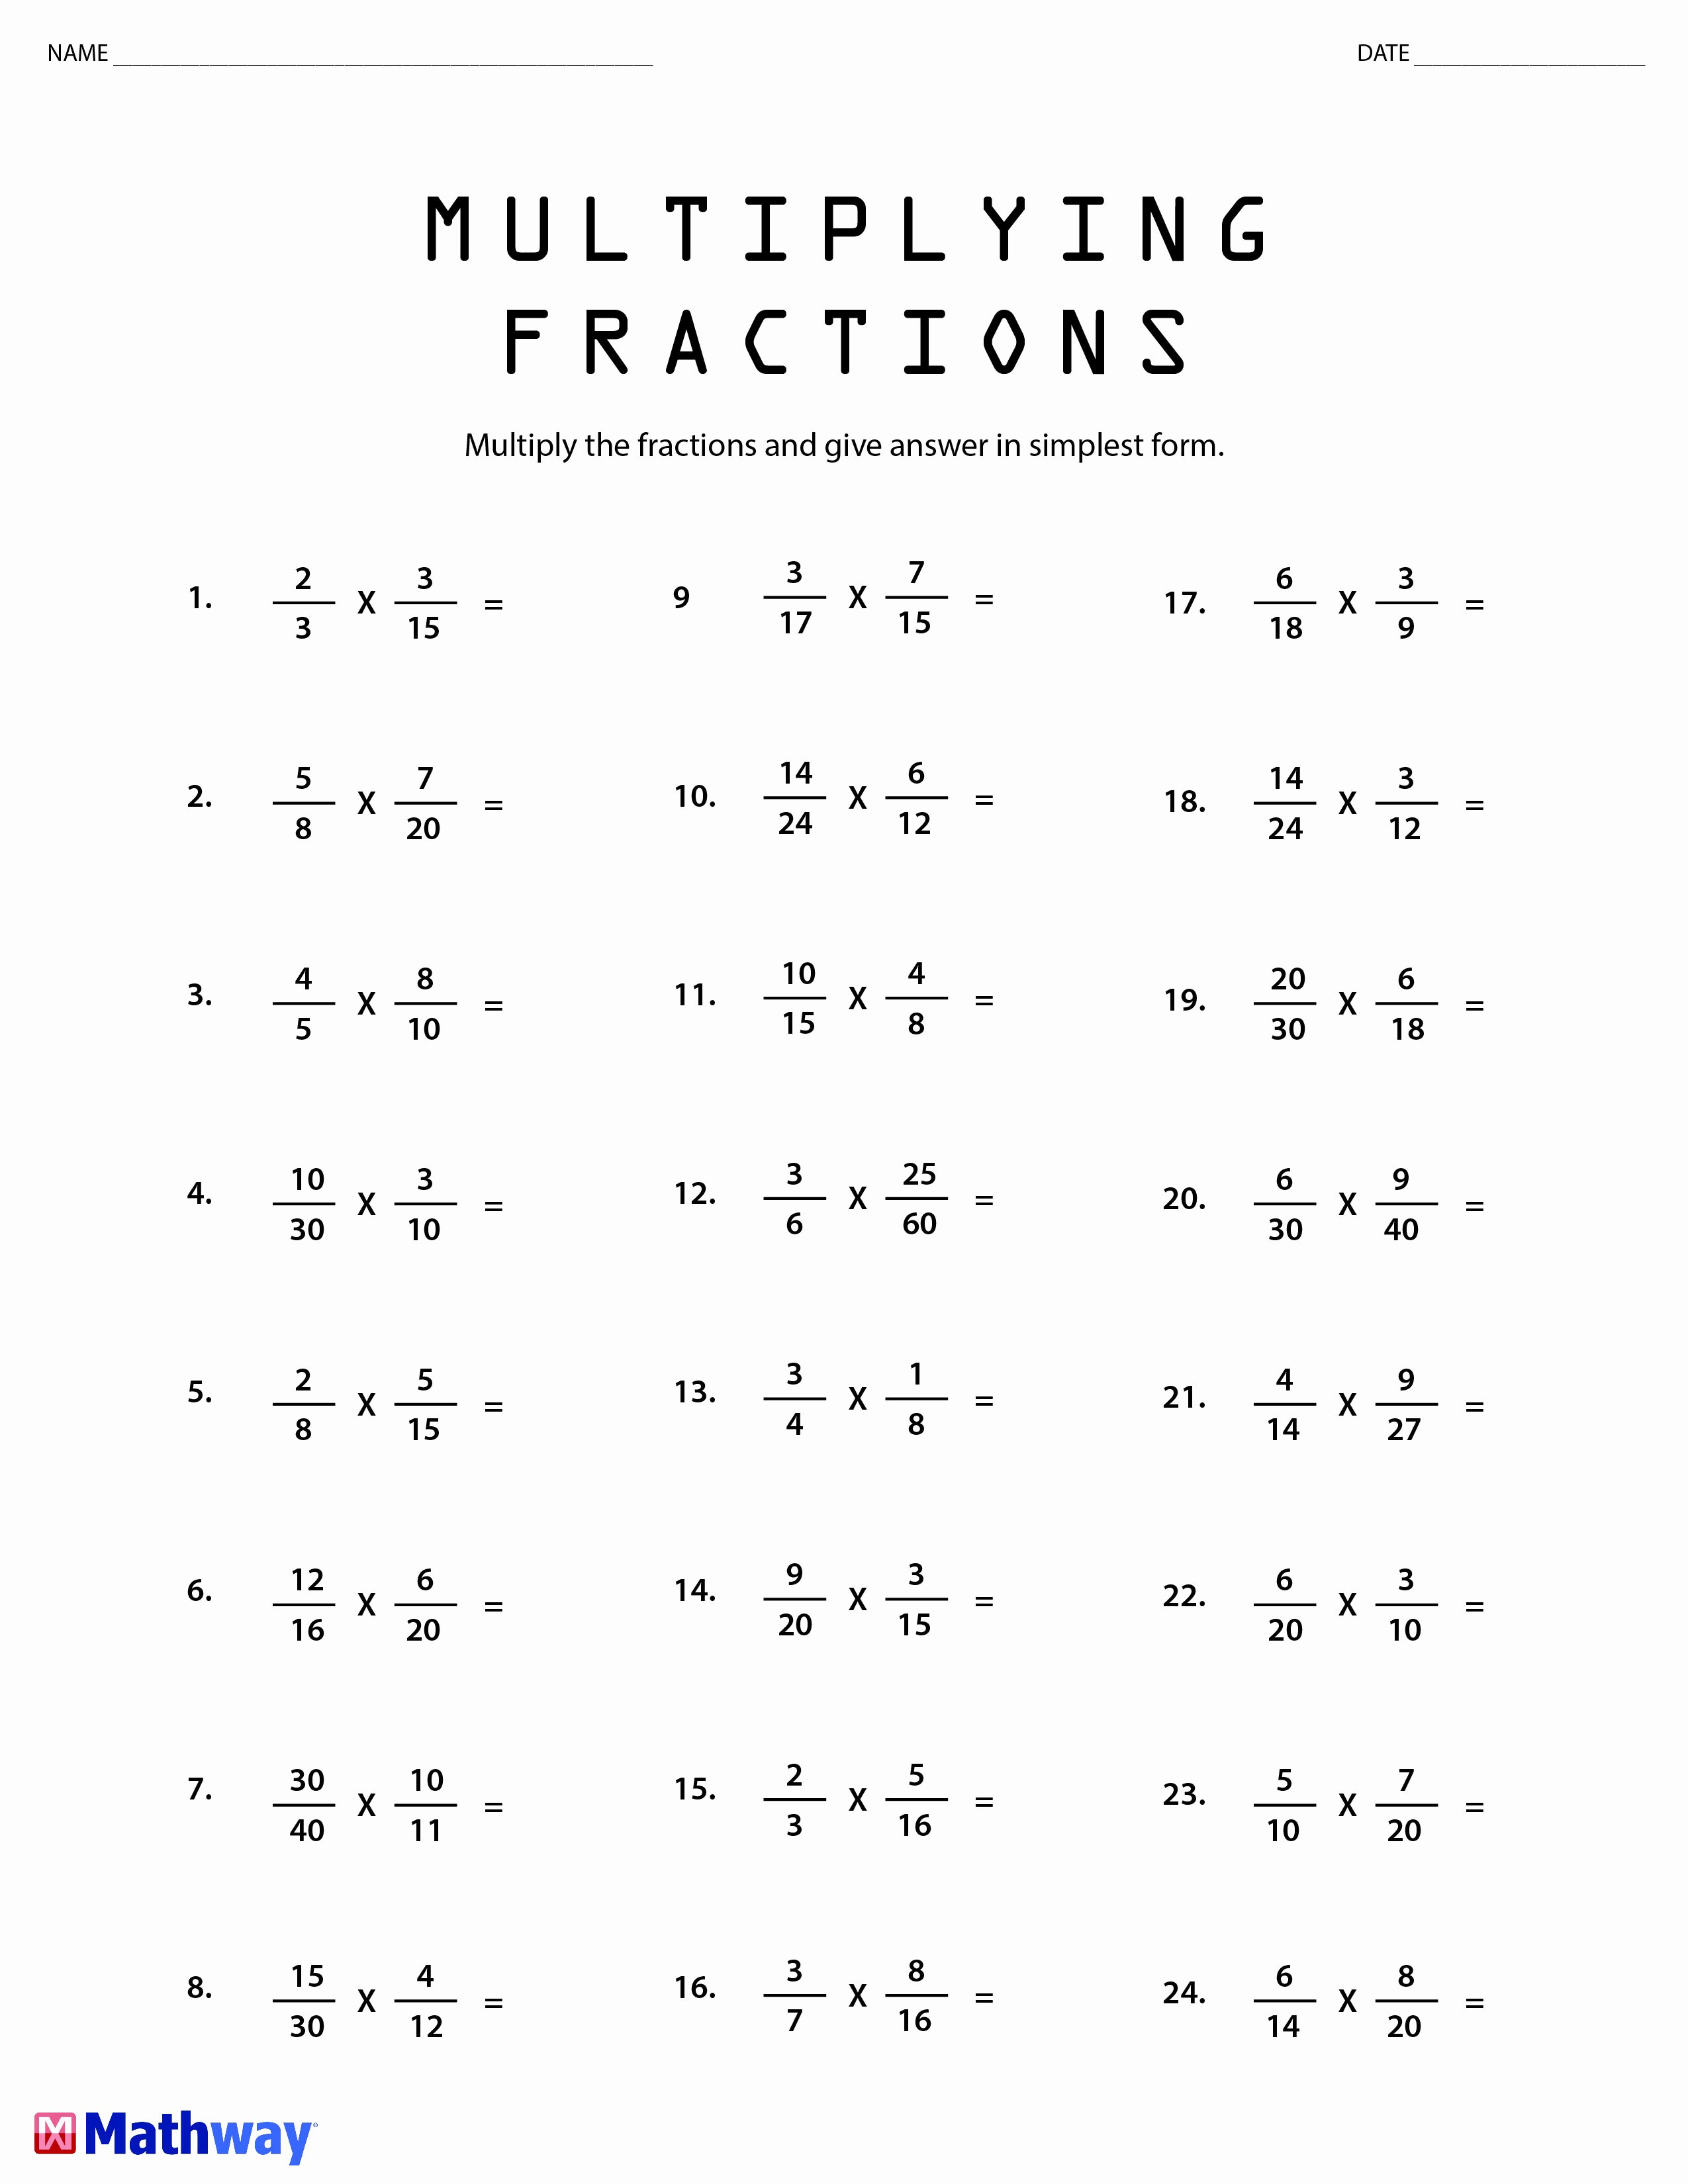 Free Multiplying Fractions Worksheets Unique Here S An Excellent Worksheet to Practice Multiplying